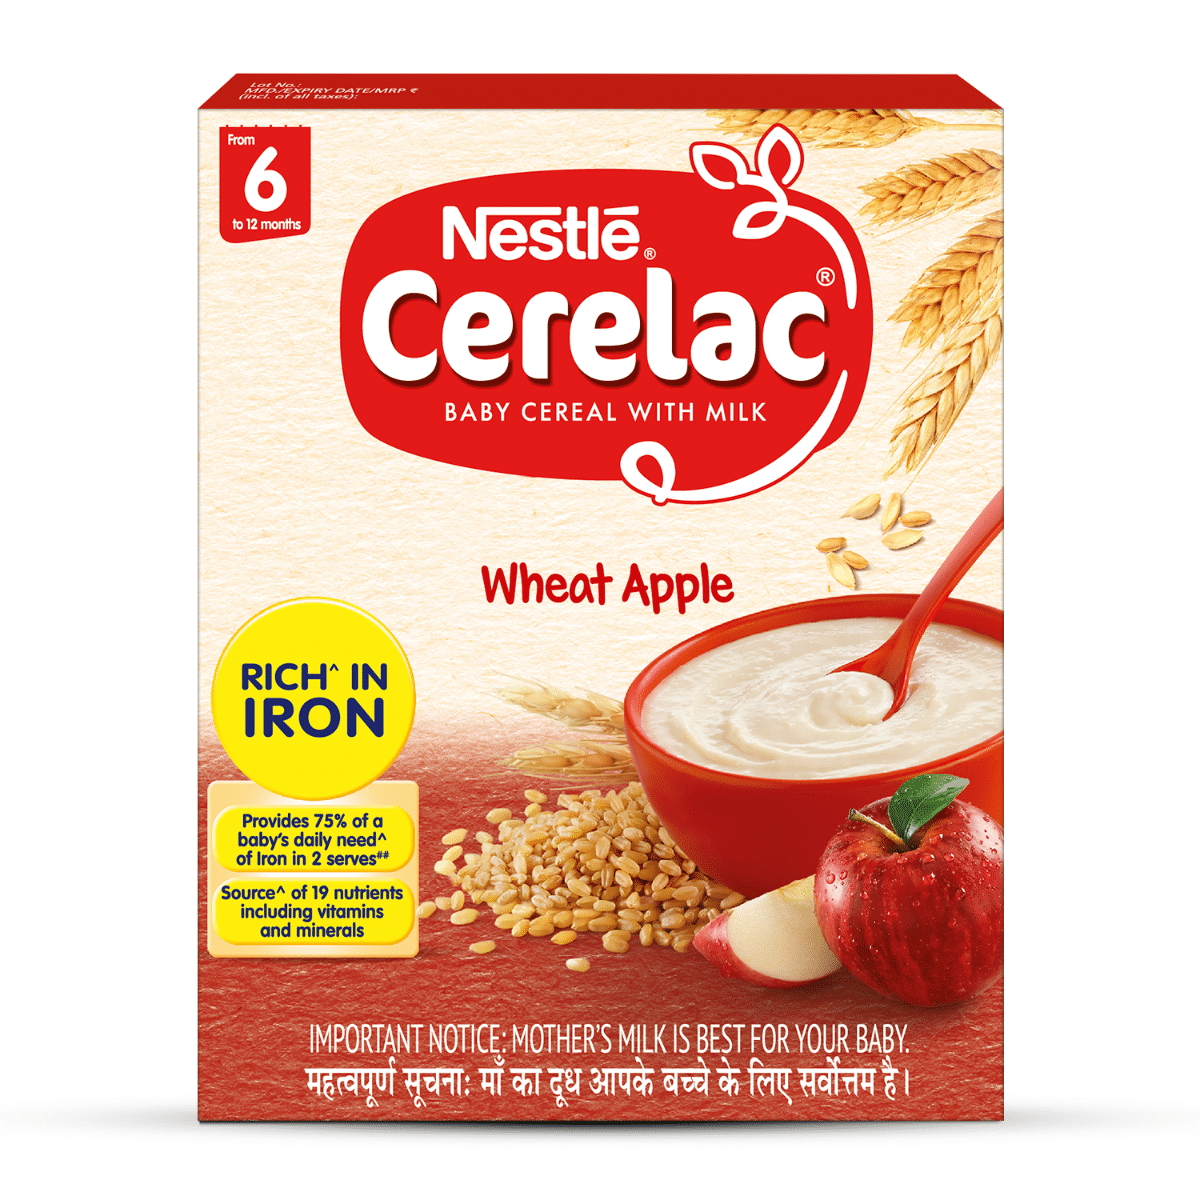 Buy Nestle Cerelac Wheat Apple Baby Cereal, 6 to 12 Months, 300 gm Refill Pack Online